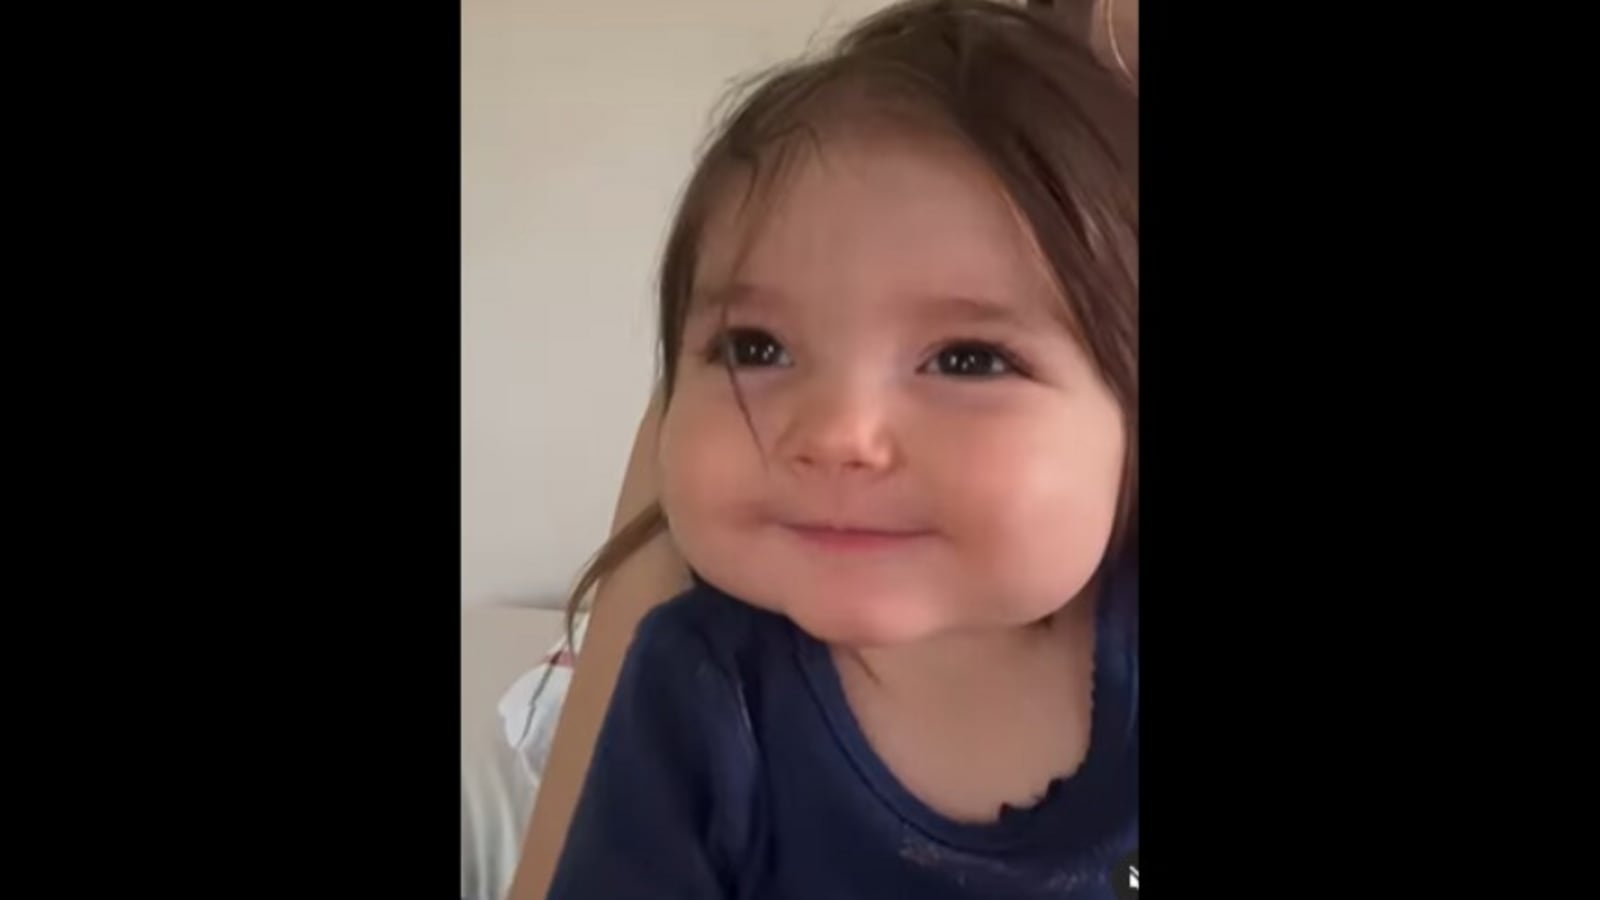 Every time this cute baby girl sneezes, she smiles. Watch adorable